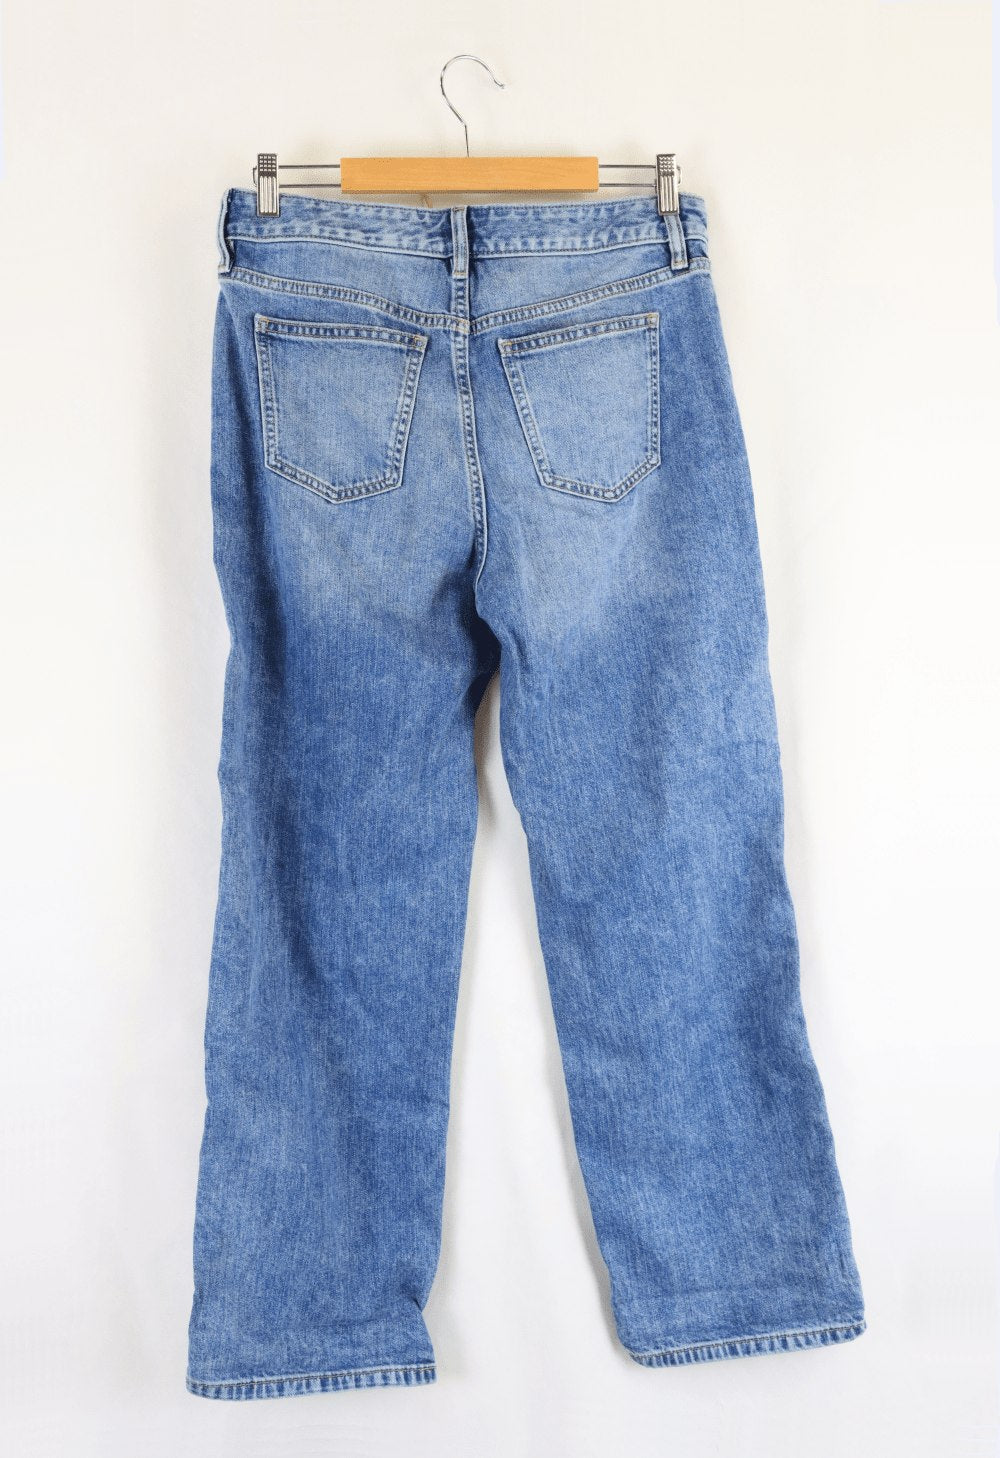 Marks and Spencer Boyfriend Jeans 10